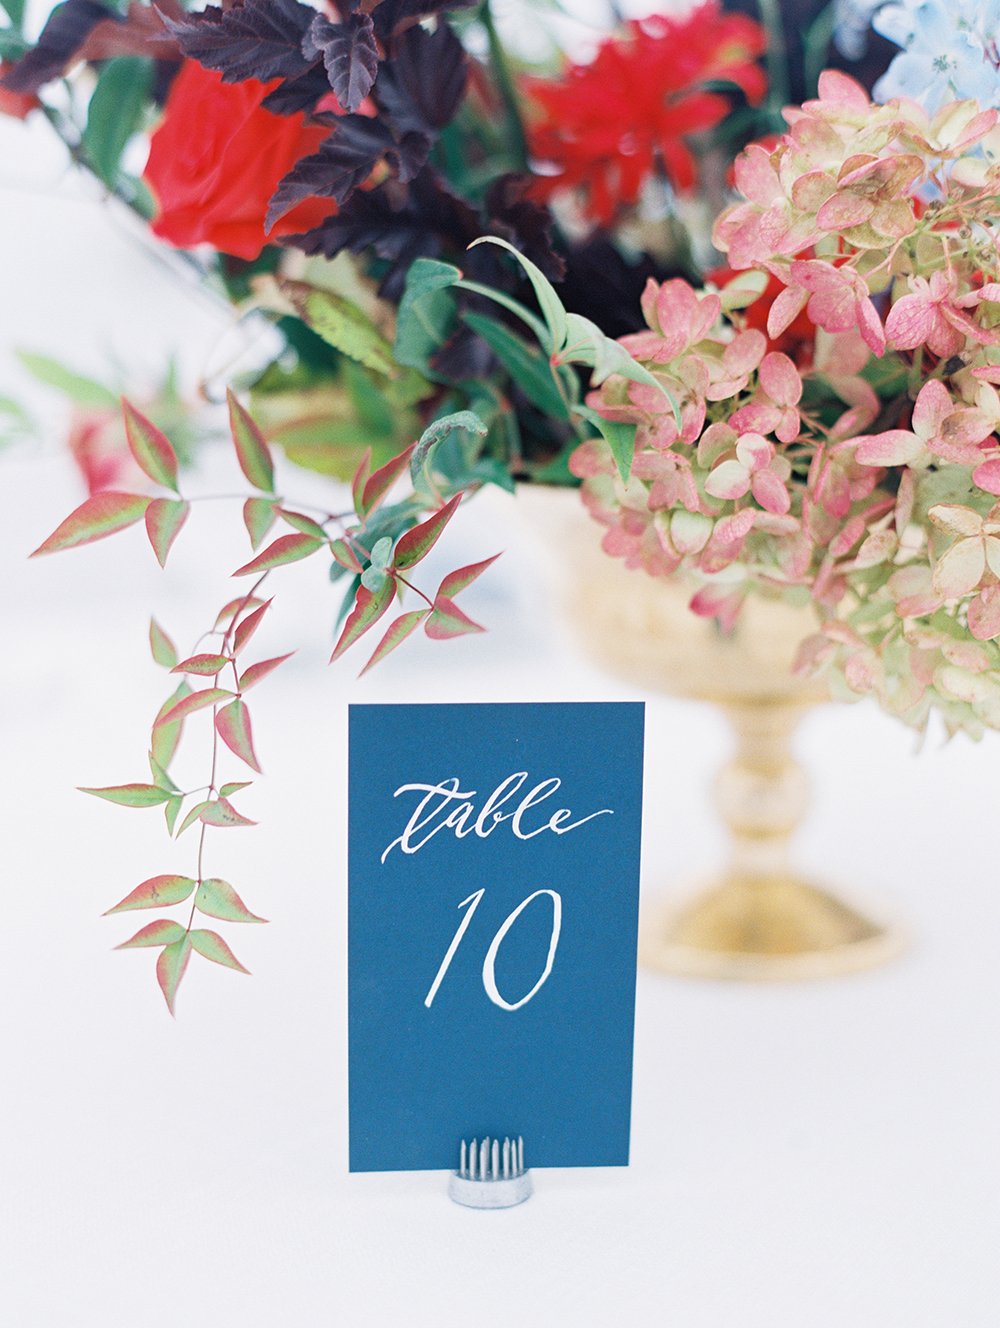 Wedding table numbers ( Photo by D’arcy Benincosa)